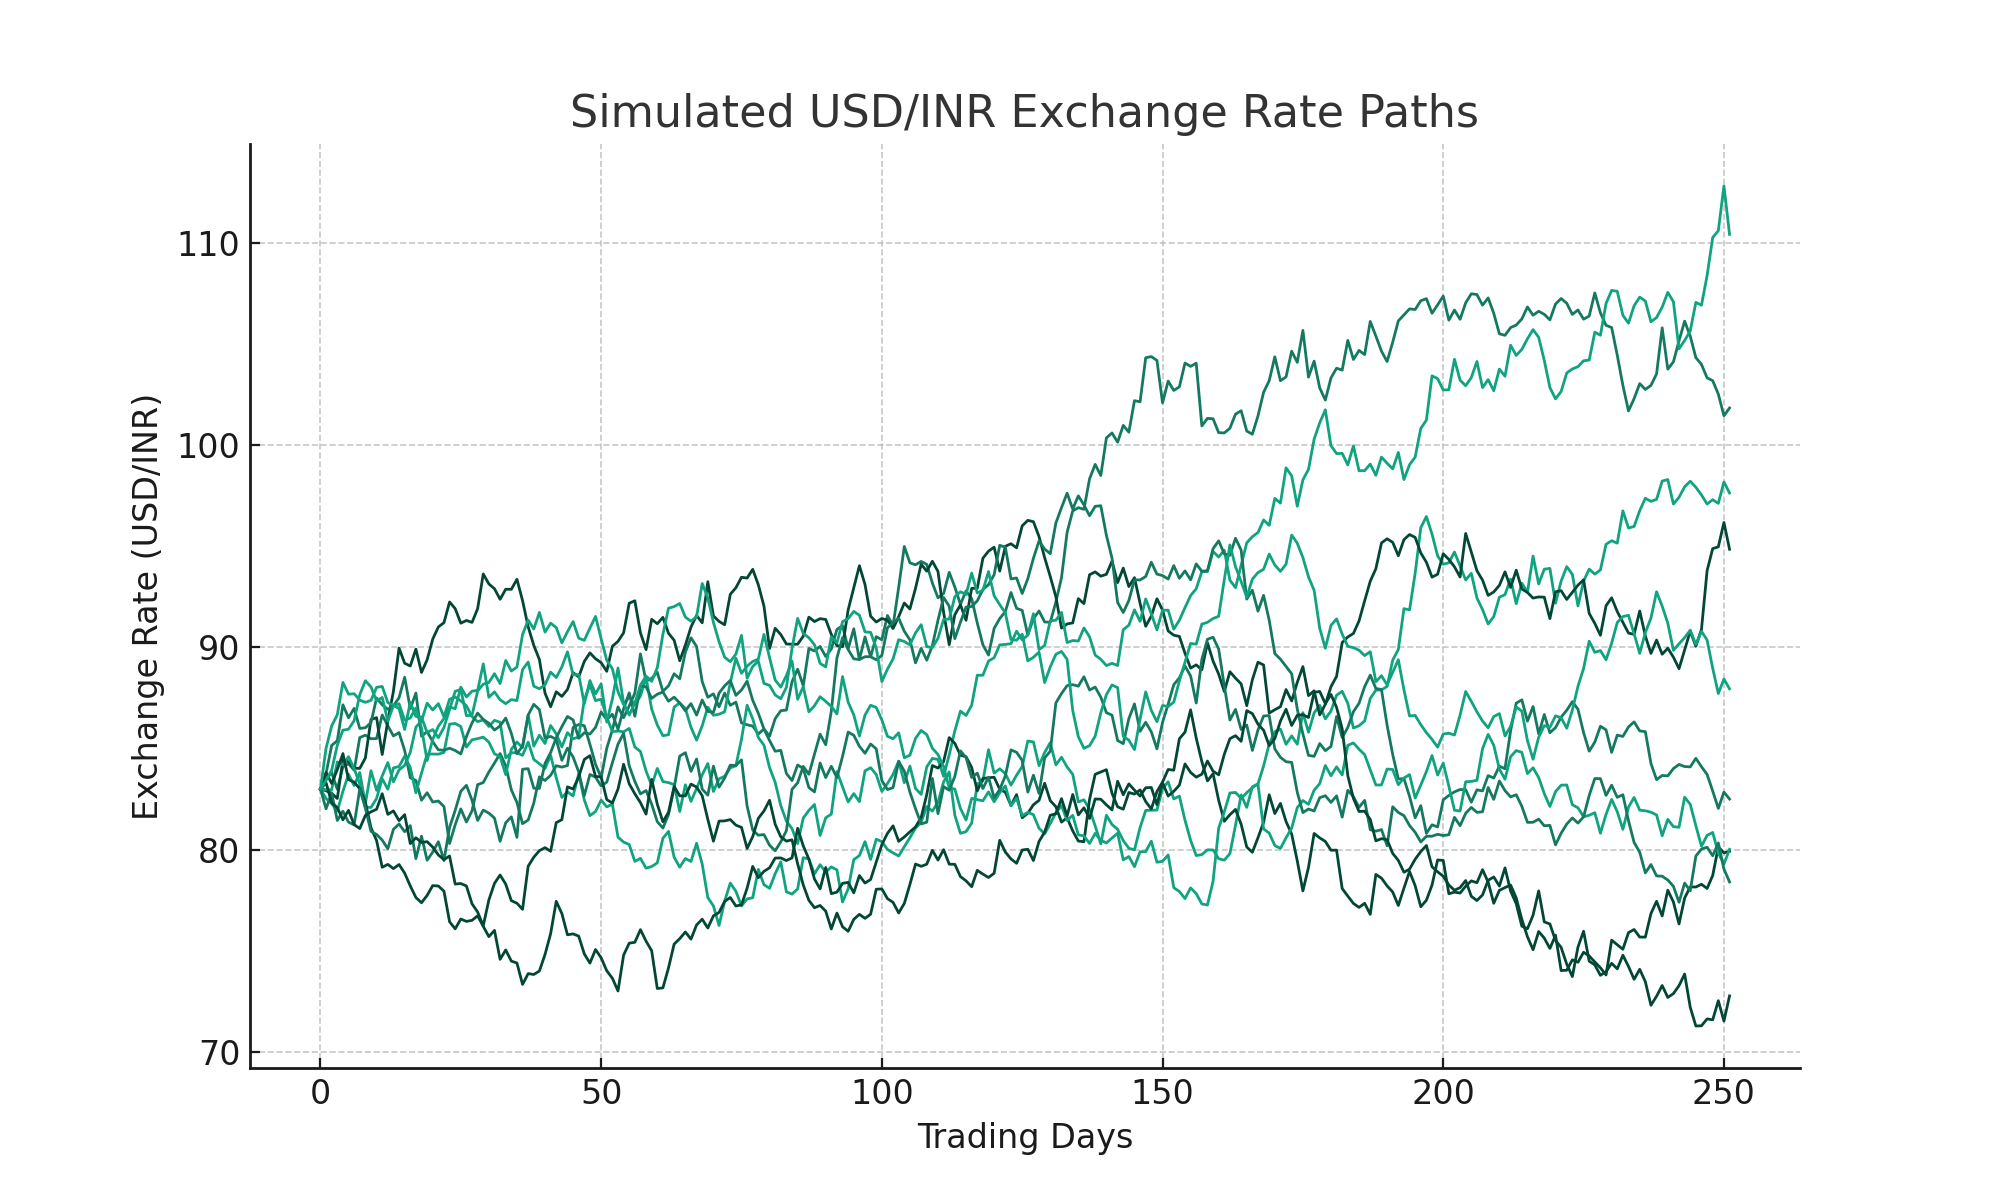 Simulated USD/INR Exchange Rate Paths